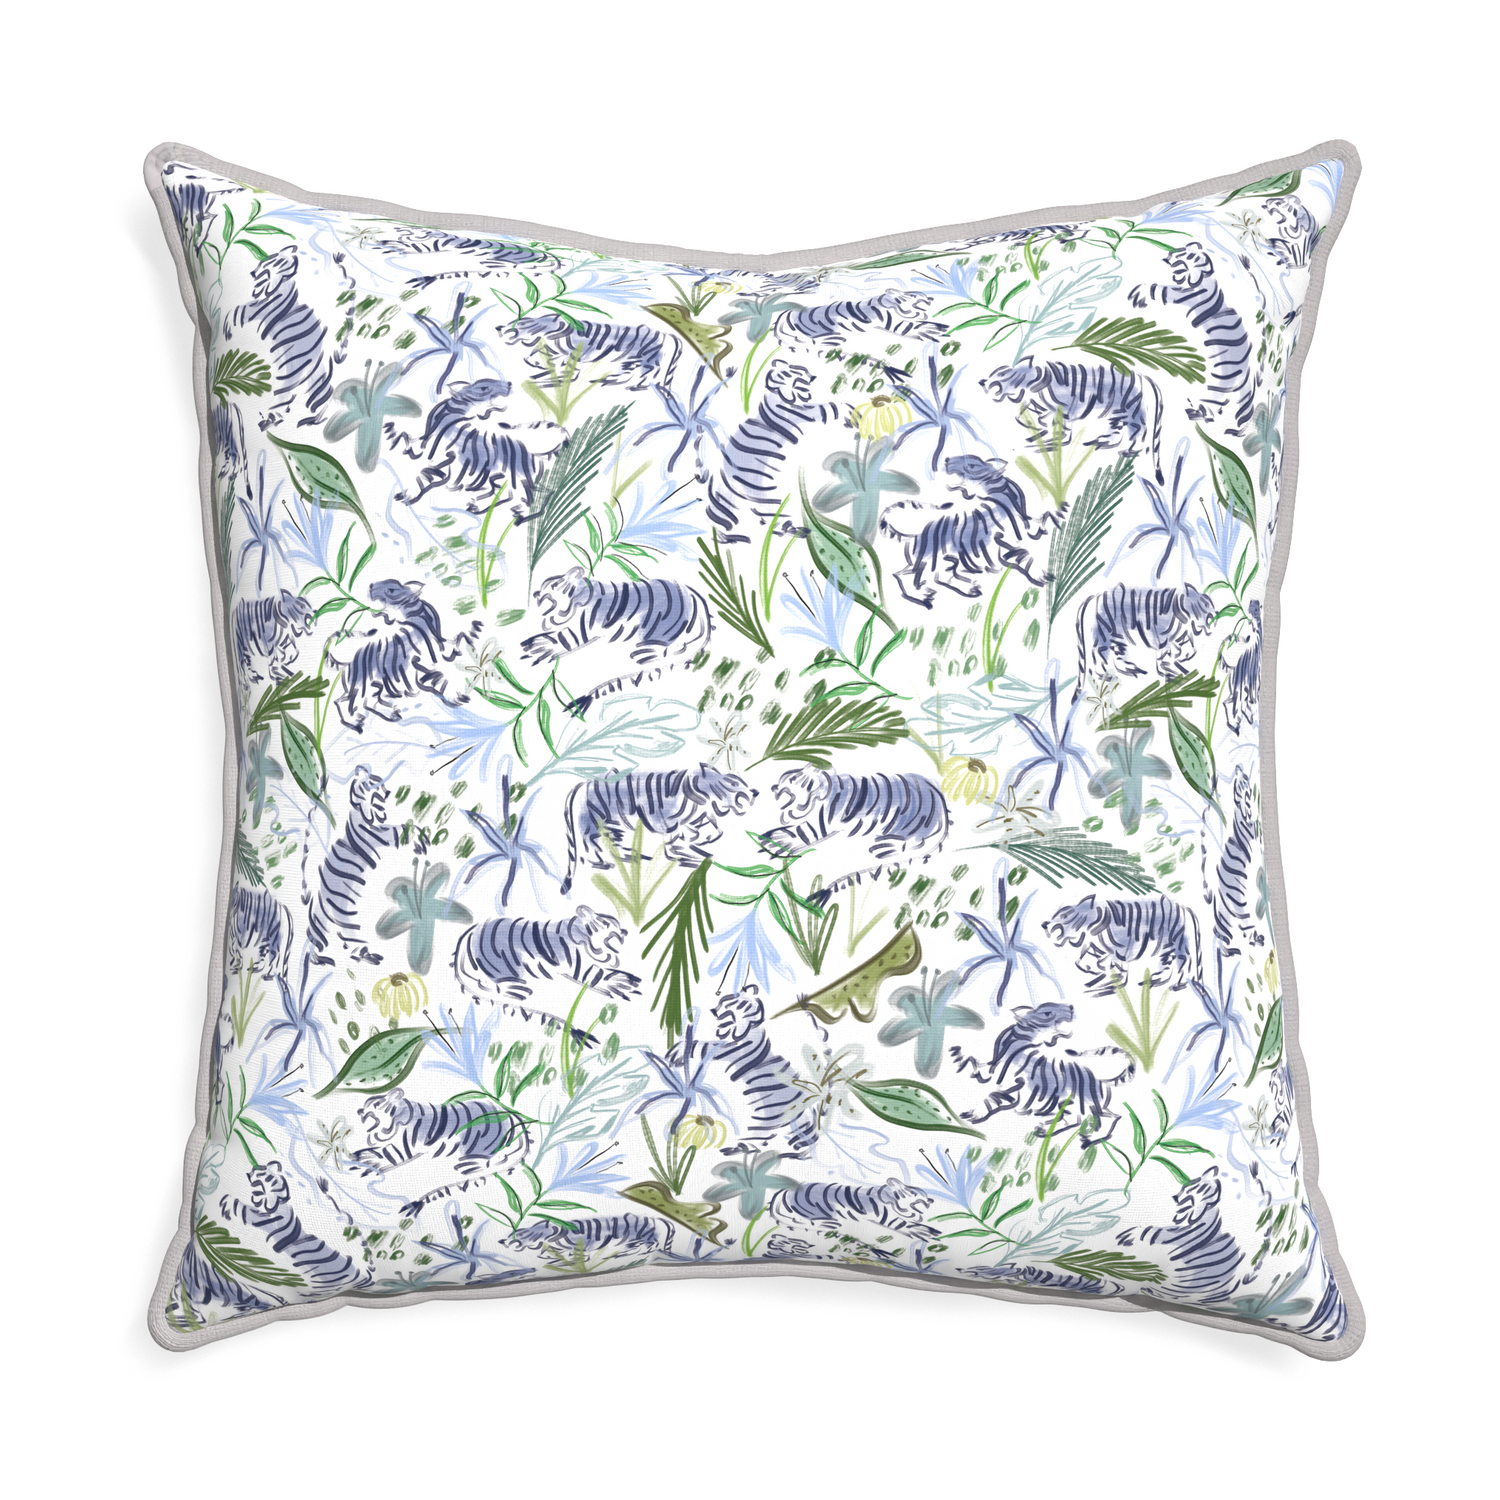 Euro-sham frida green custom pillow with pebble piping on white background